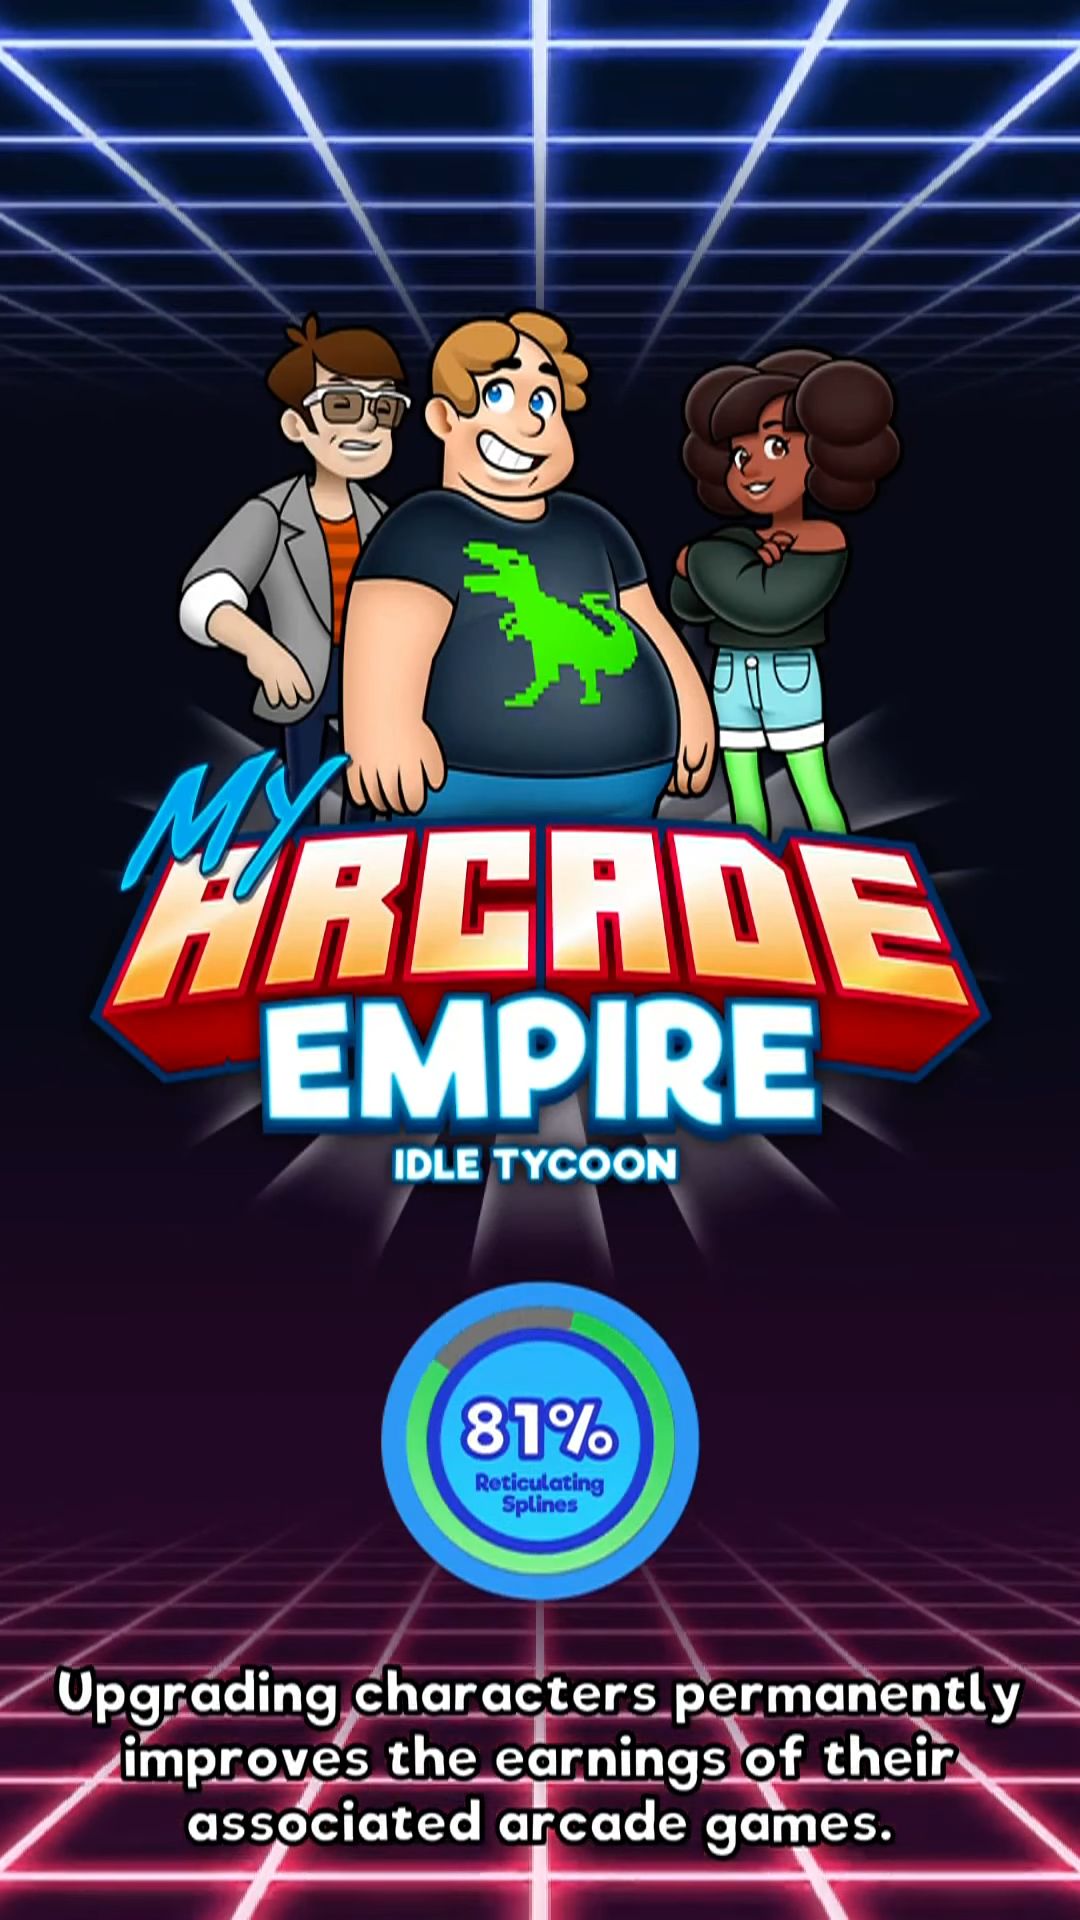 Scarica My Arcade Empire - Idle Tycoon gratis per Android.